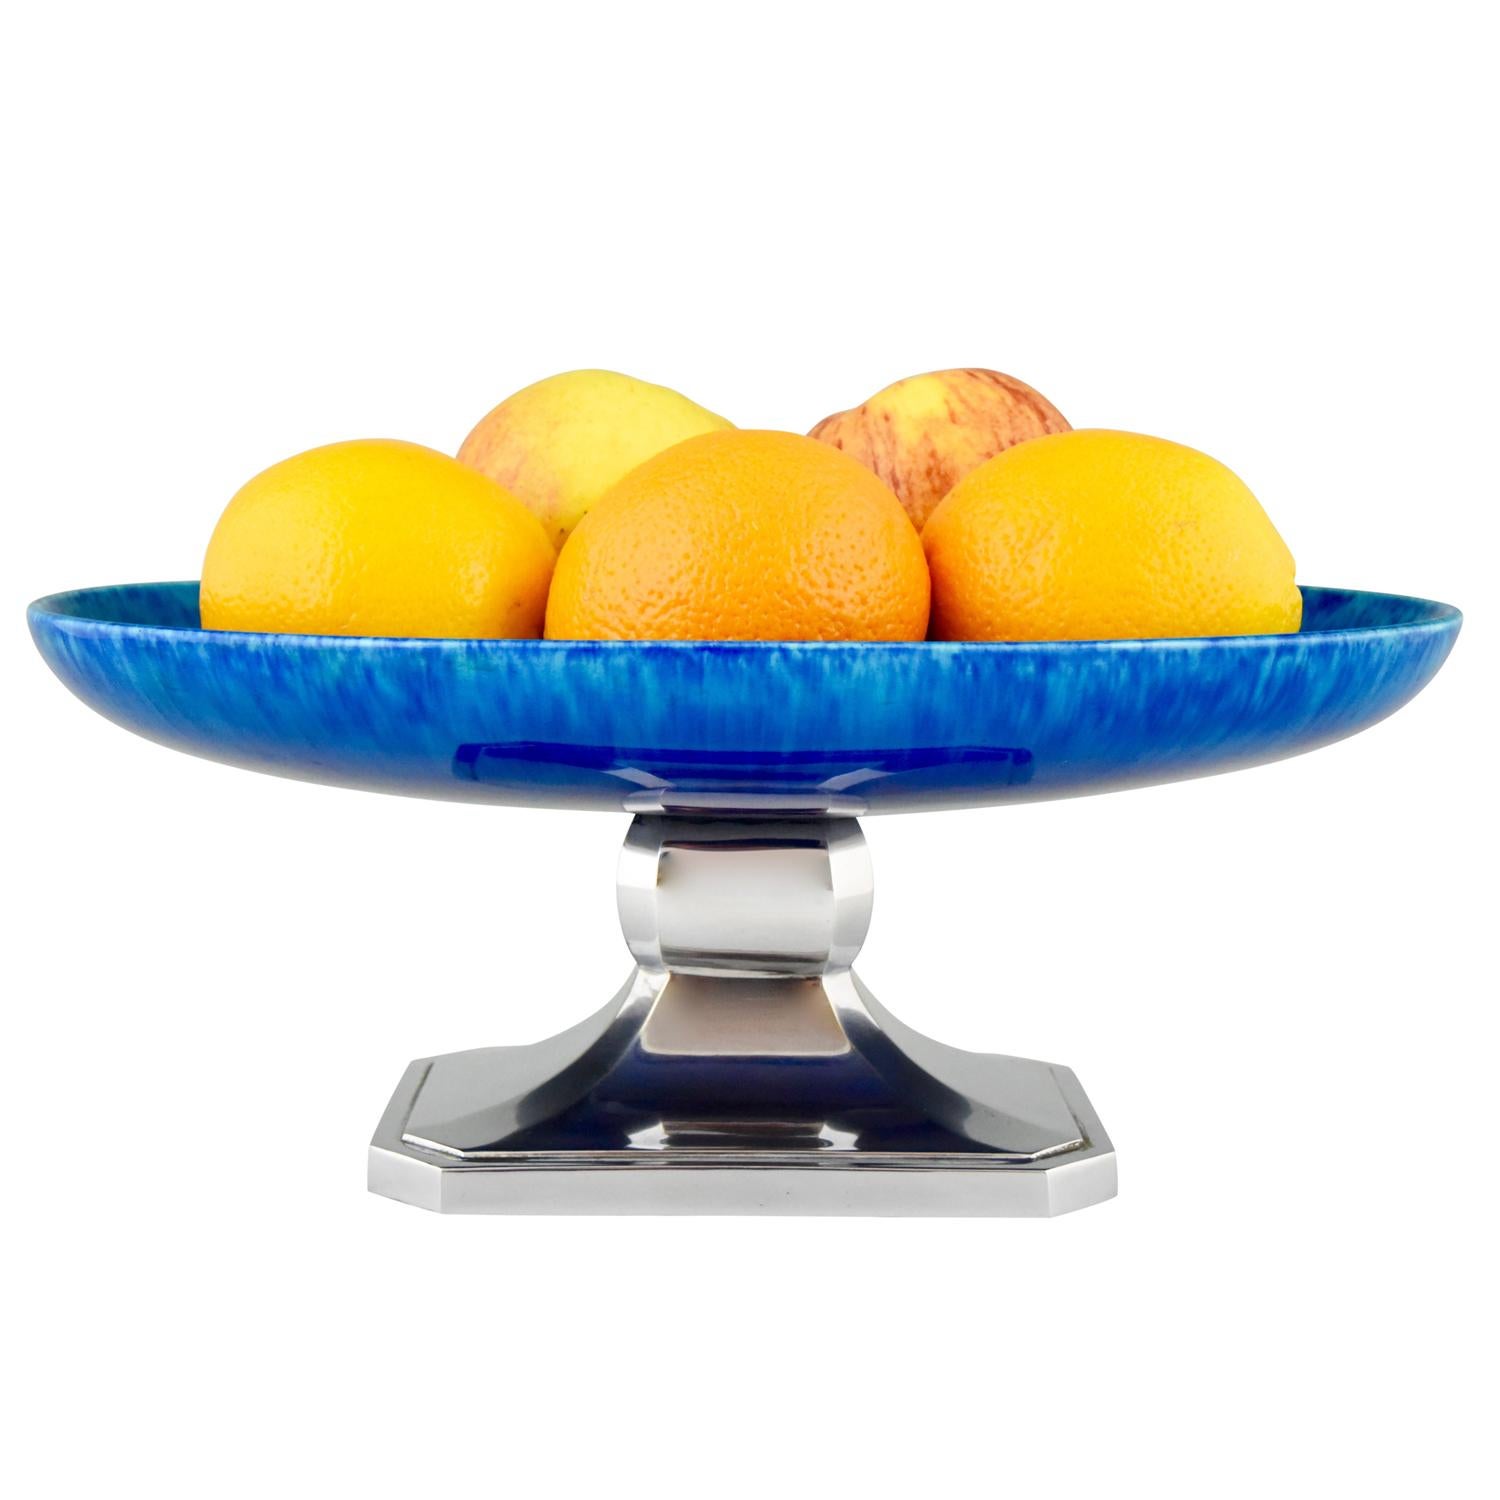 Lovely Art Deco fruit dish or centerpiece in a beautiful blue glazed ceramic standing on a chromed metal base. This piece has been created circa 1930 in France by Paul Milet for Sèvres.
1.8 KG.